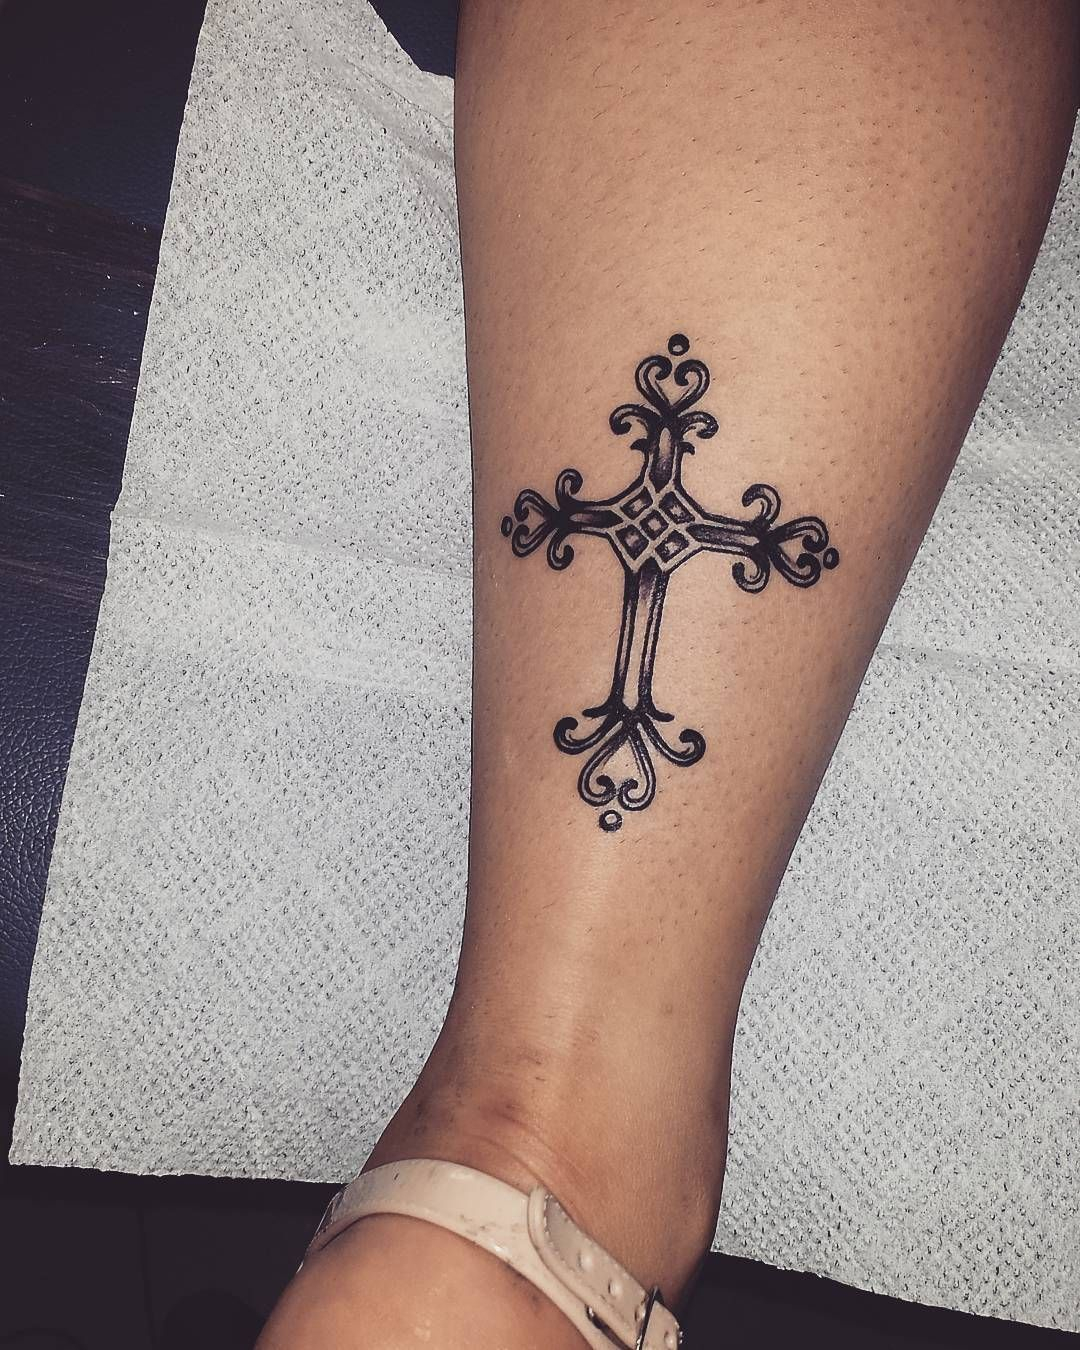 25 Unique Small Cross Tattoo Designs Simple And Lovely Yet in dimensions 1080 X 1350